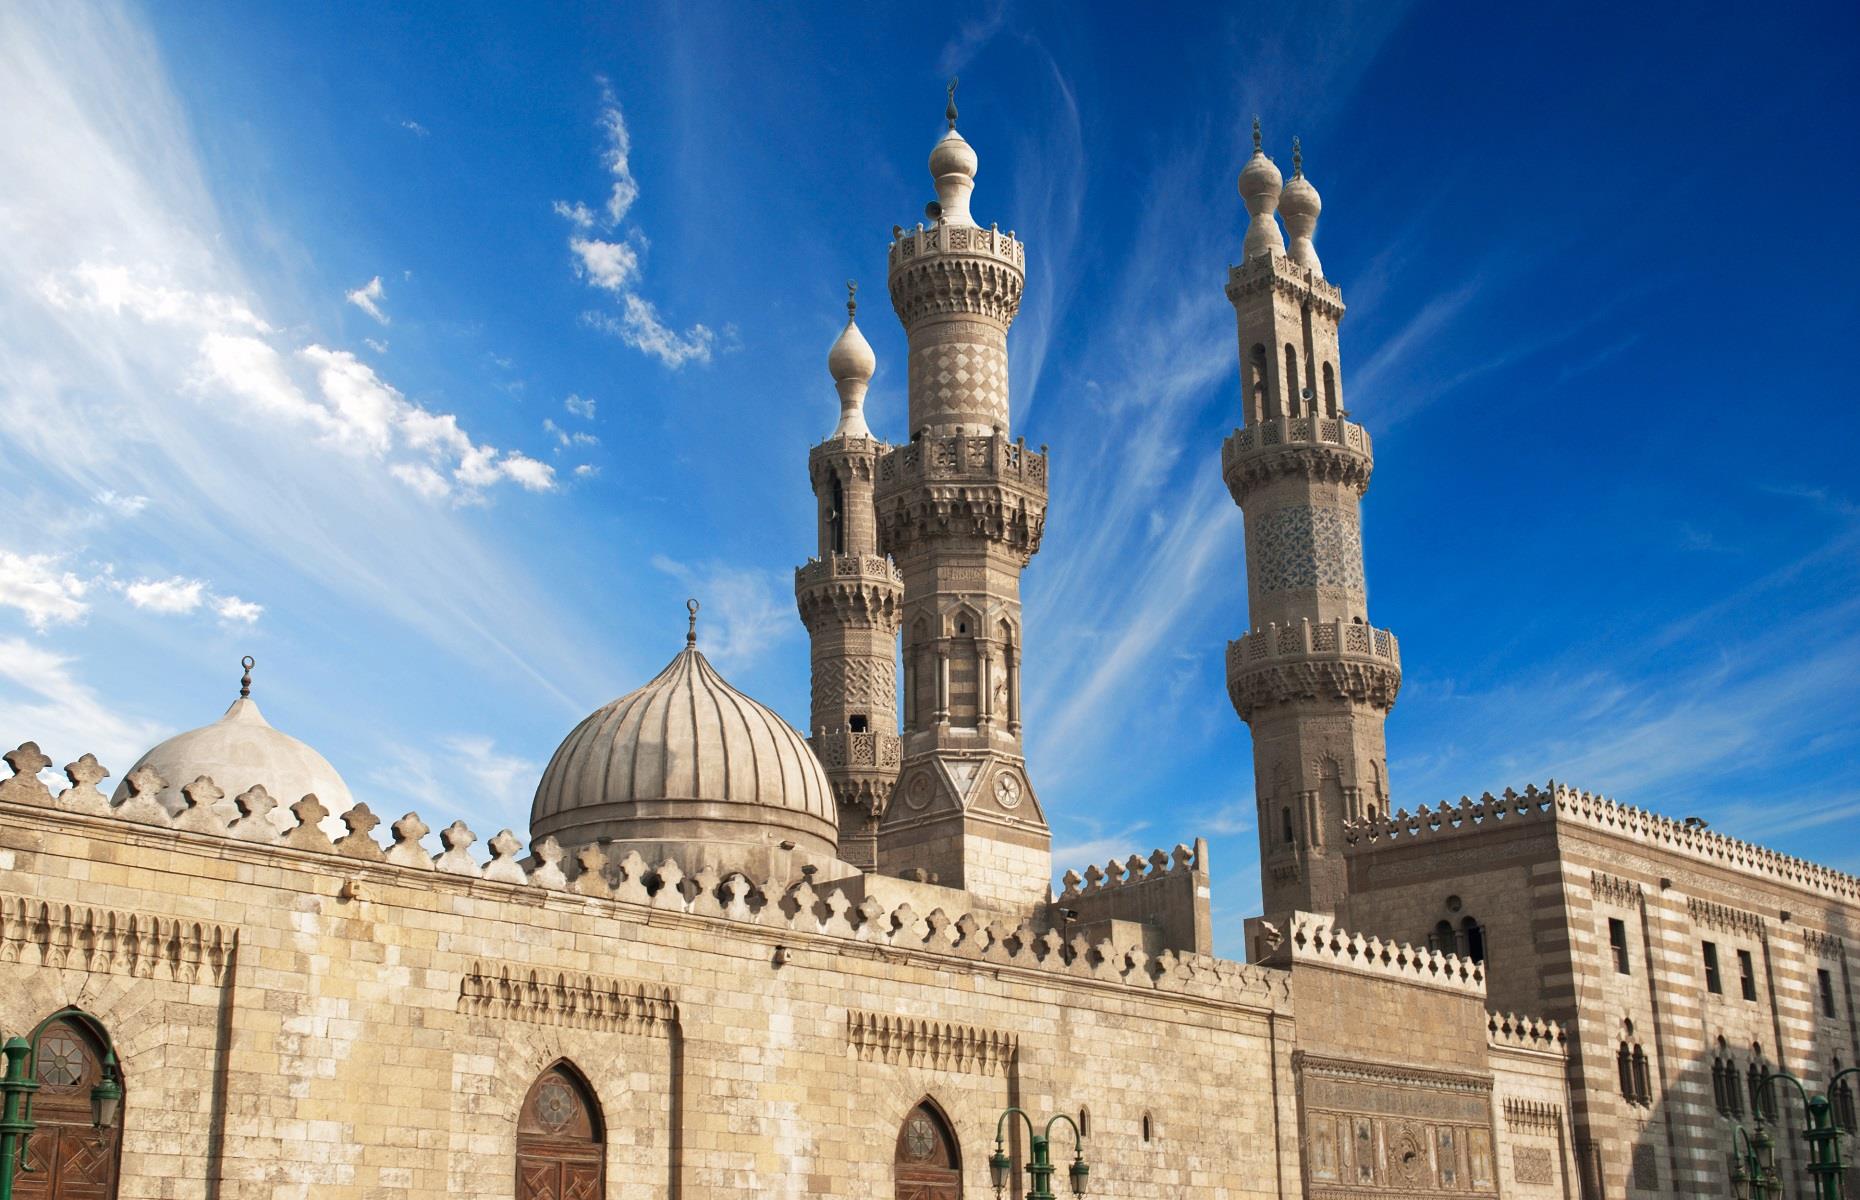 <p>Despite its beauty and age, there's a chance you've never heard of <a href="http://www.azhar.edu.eg/AboutUs/i">Al-Azhar University</a> in Cairo, Egypt. The ancient institution dates back to AD 970 and is among the largest universities in the world – not to mention one of the oldest. Renowned as the most prestigious site for Islamic learning, the college is housed inside breathtaking Al-Azhar Mosque, which dates back to the Fatimid era. Tours are usually available and the mosque's white-marble courtyard should not be missed.</p>